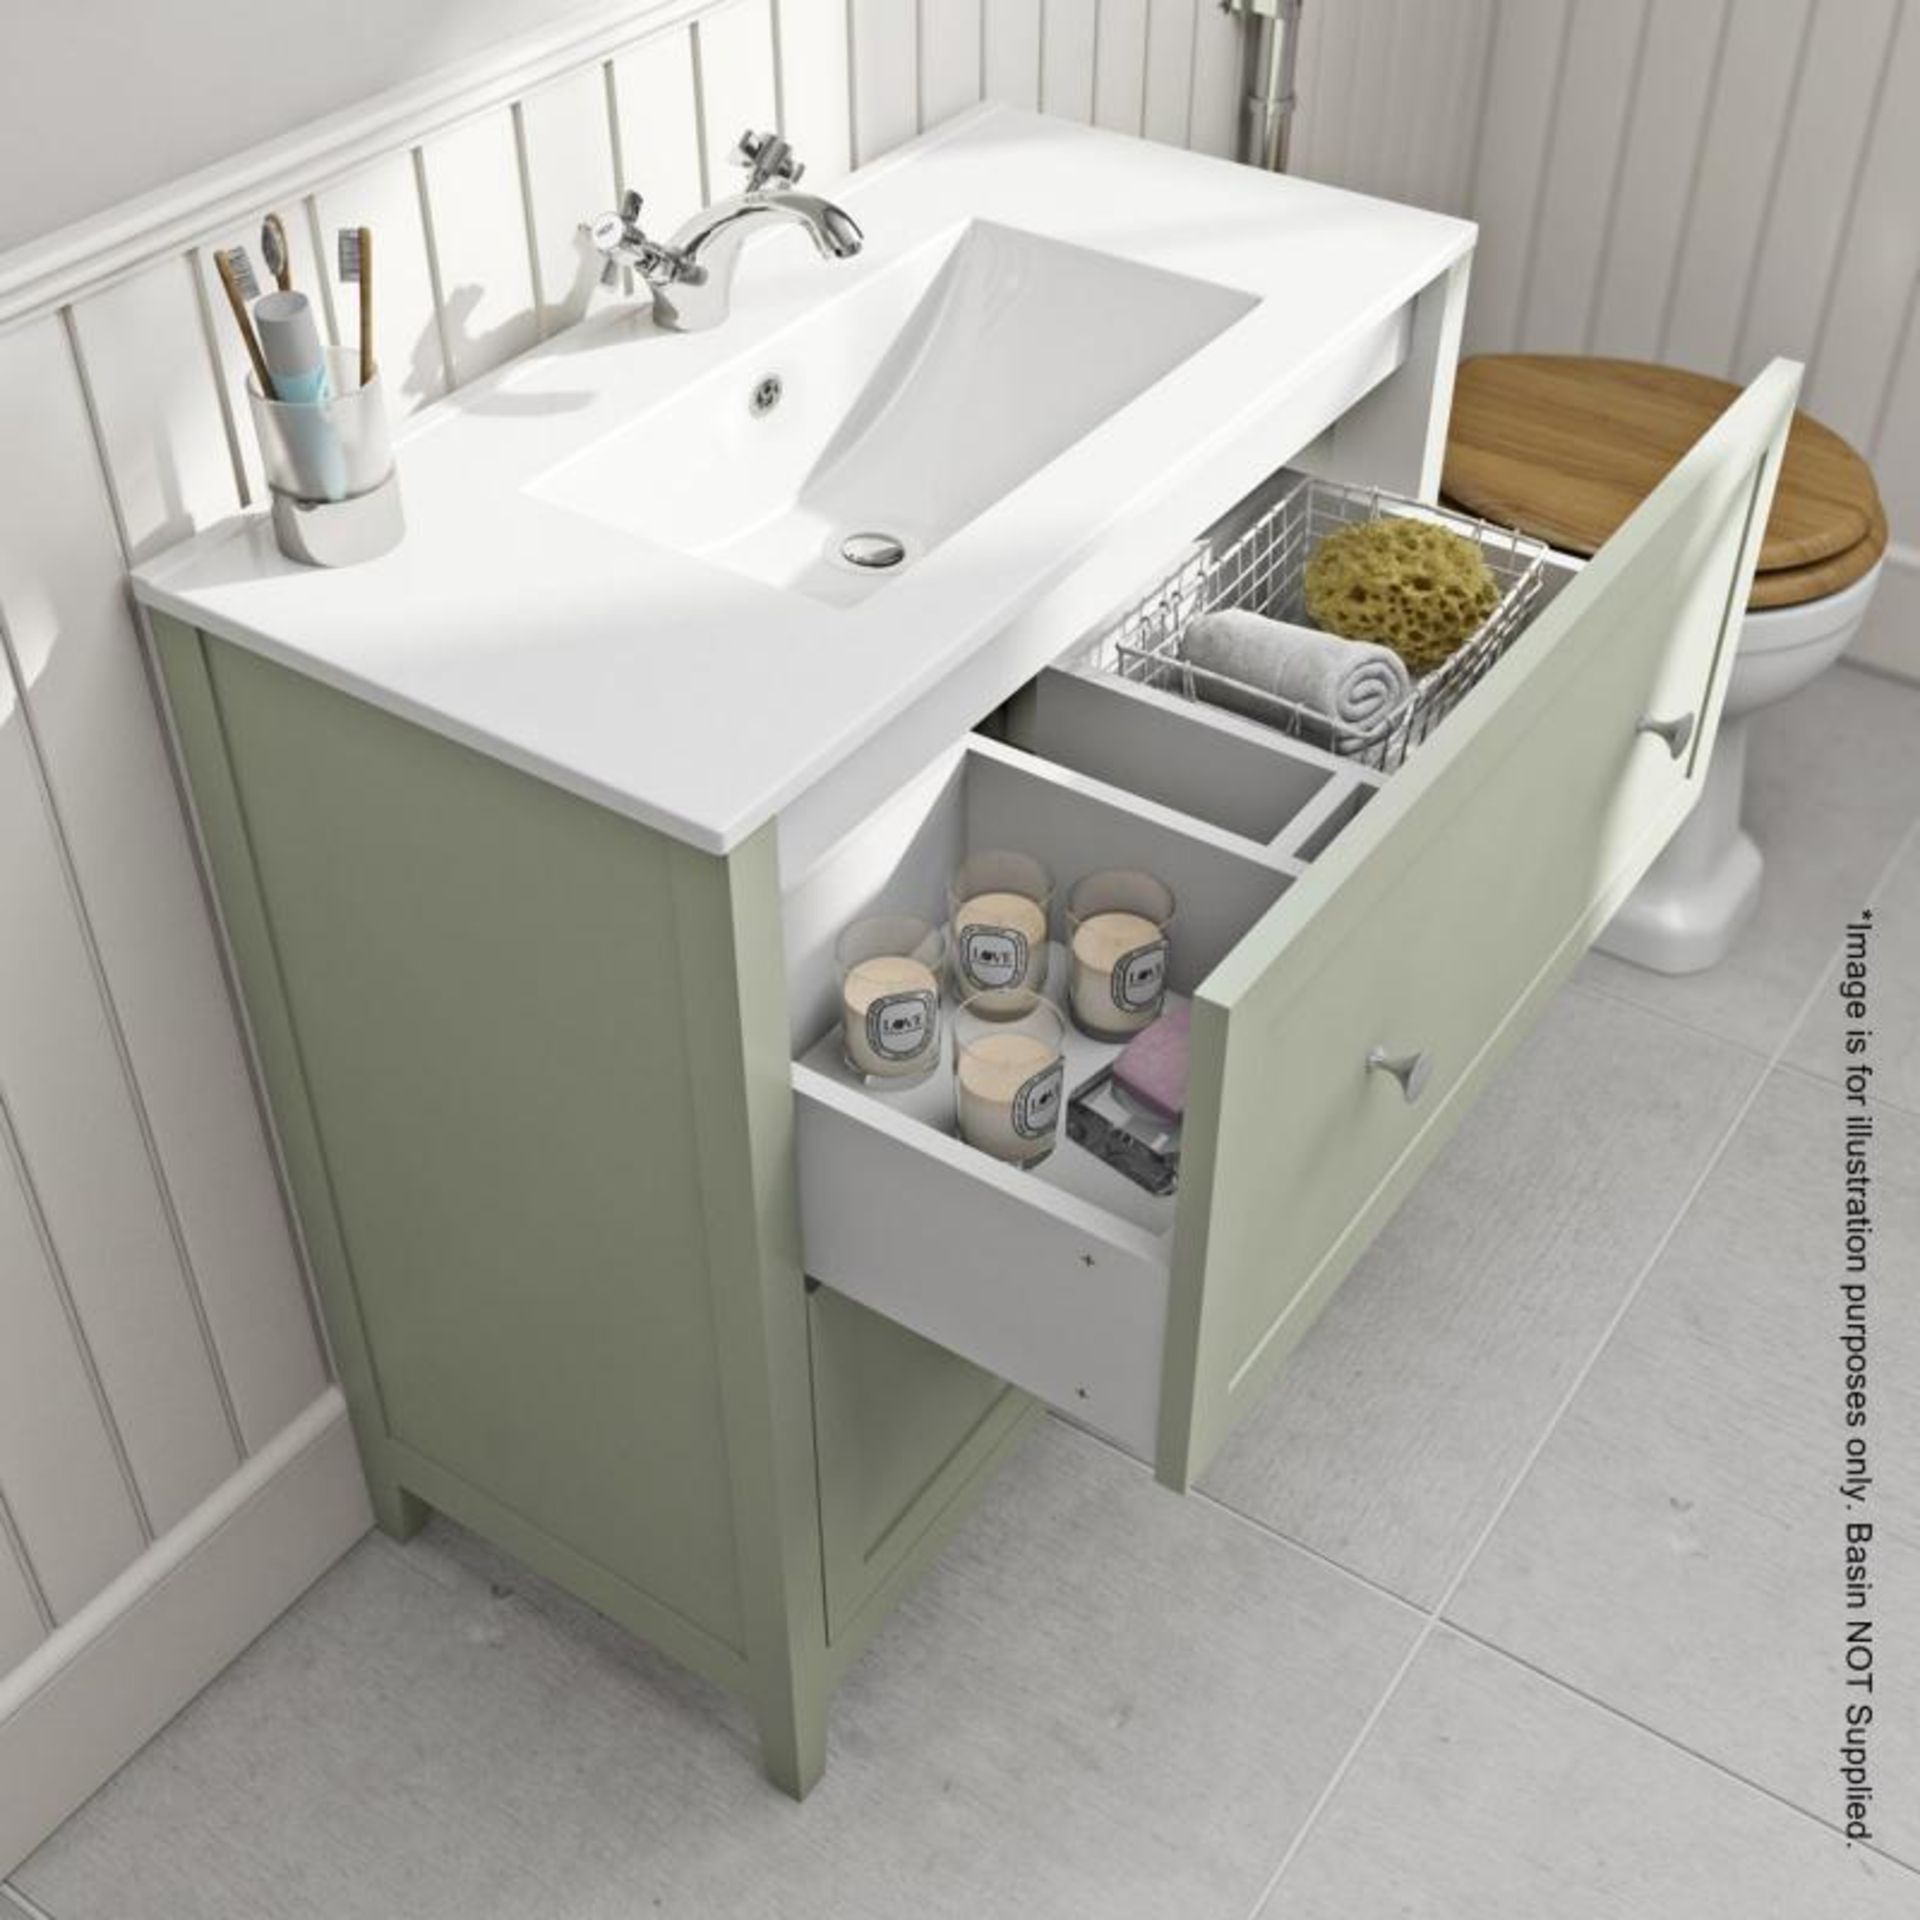 1 x Camberley 800 2-Drawer Soft Close Vanity Unit In Sage Green - New / Unused Stock - Dimensions: W